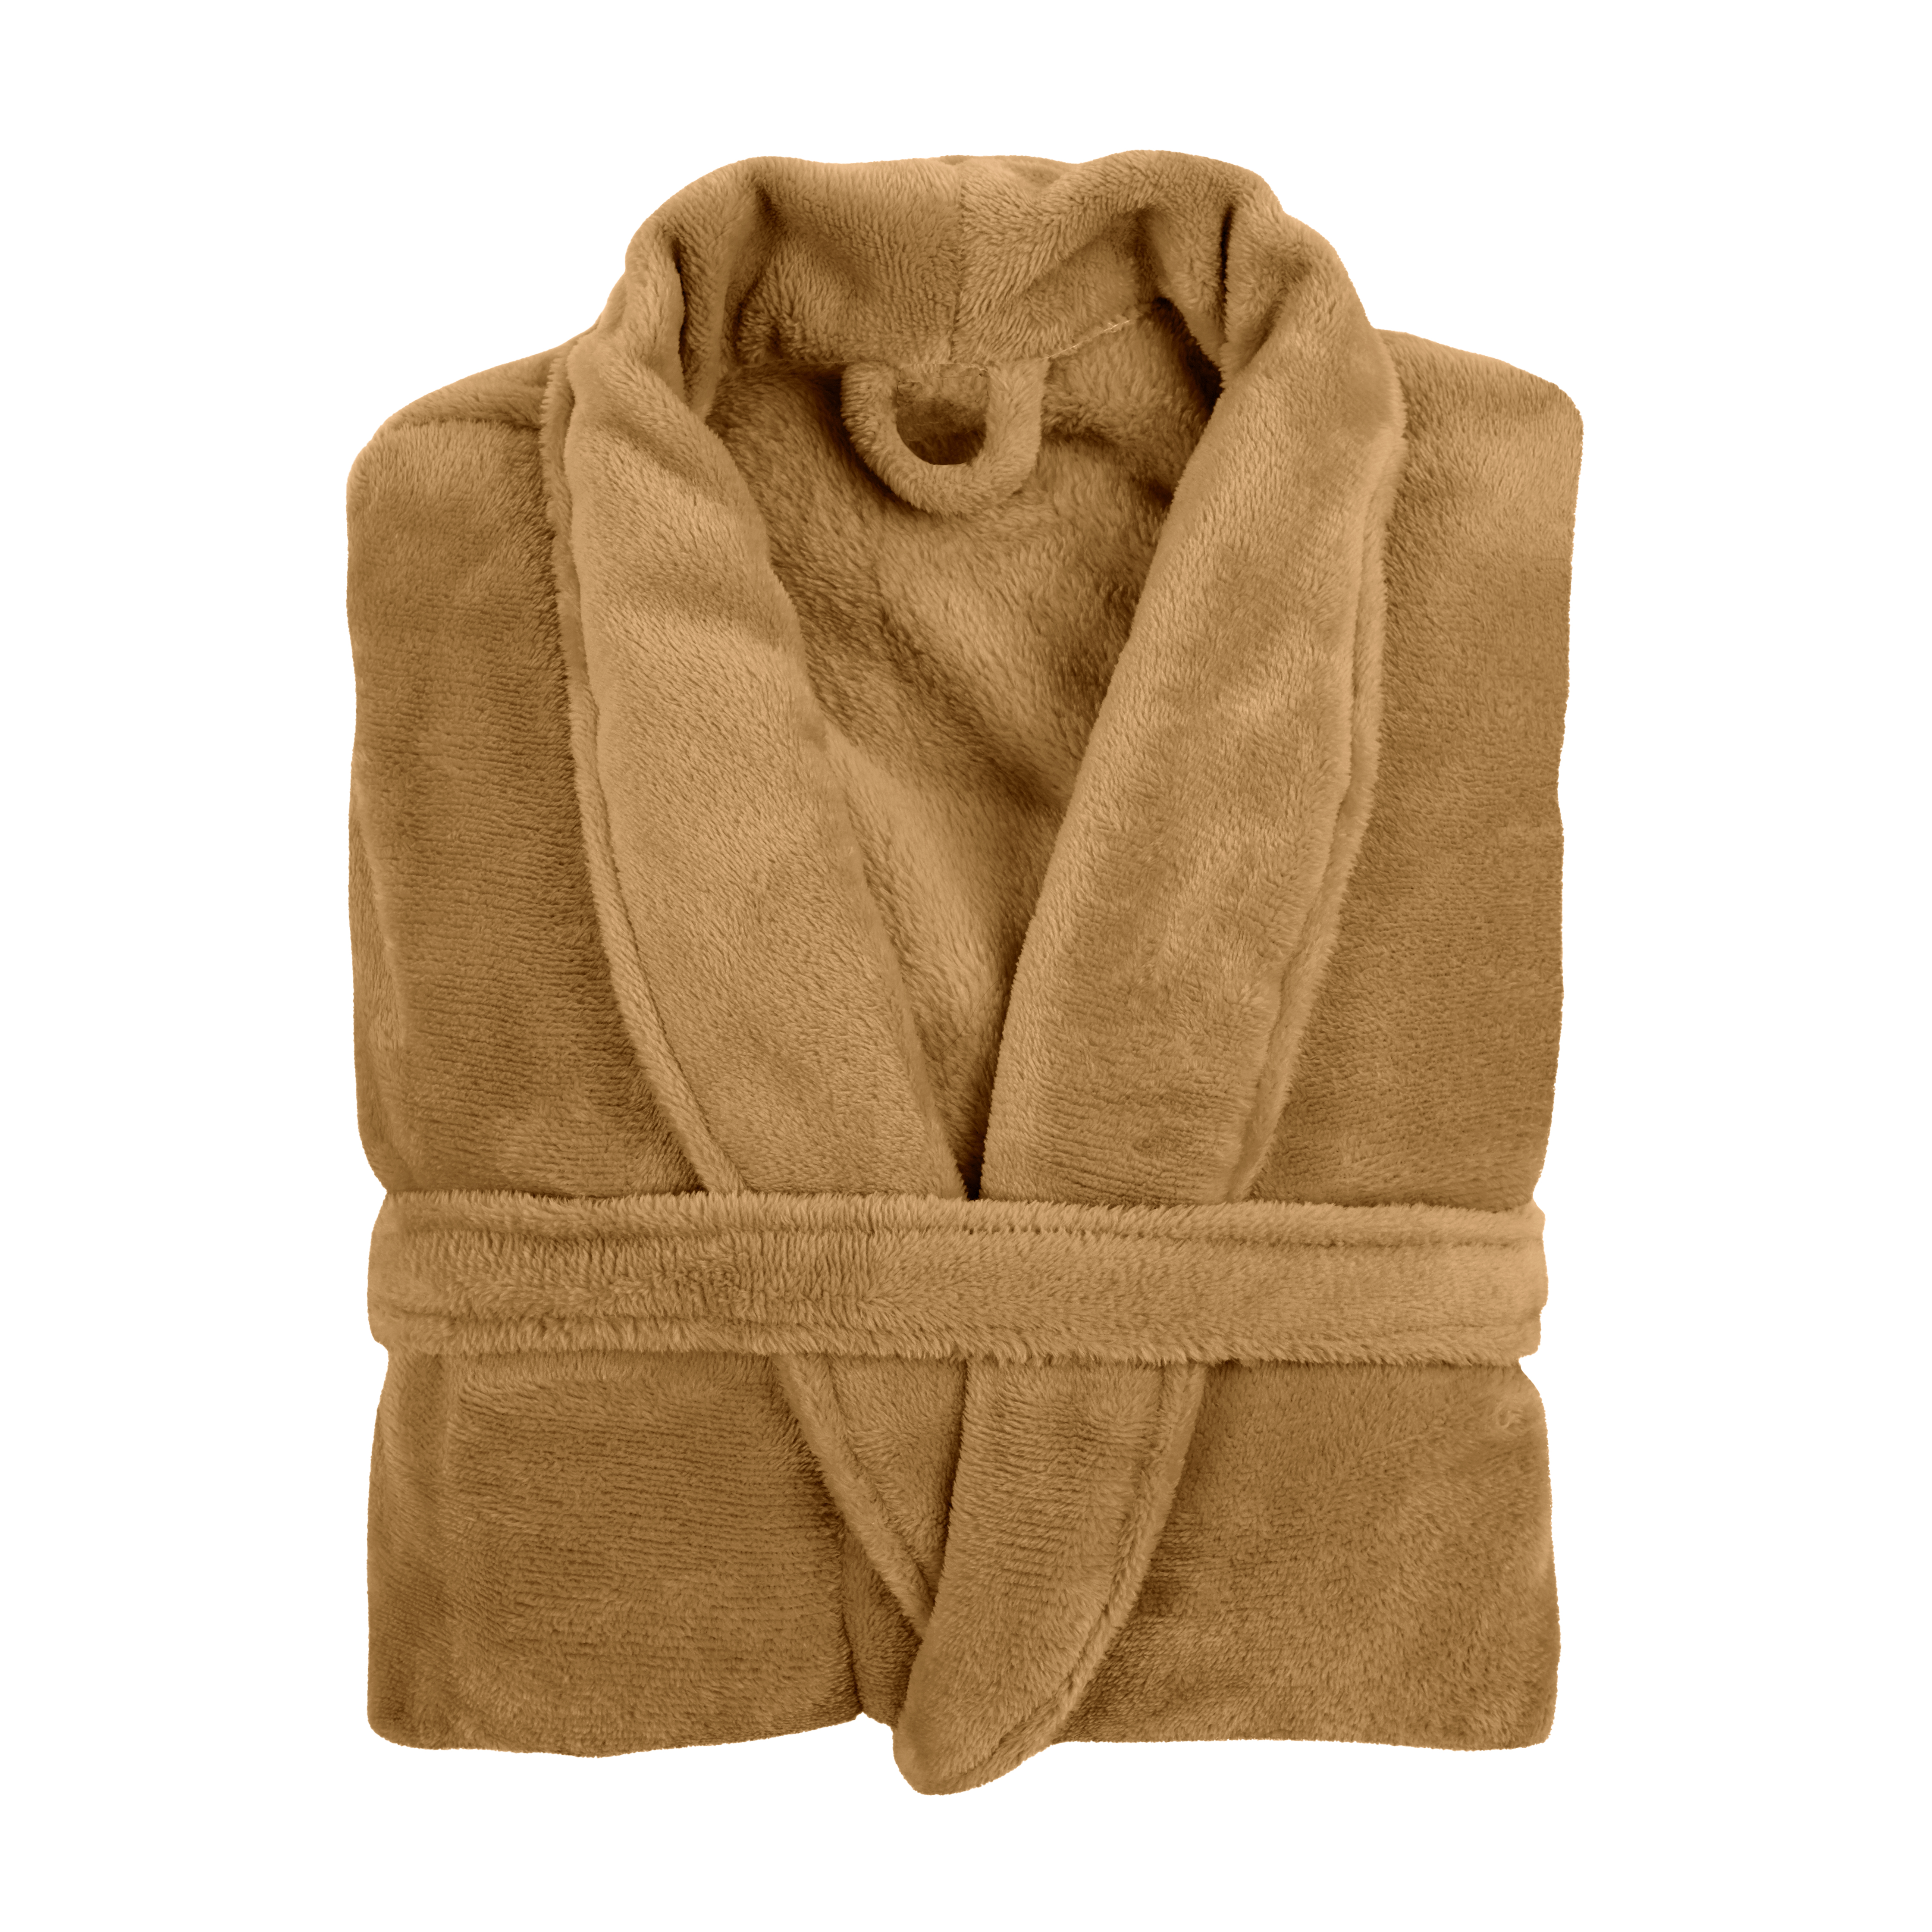 Badjas COSY microflannel- S/M - unisex, indian tan